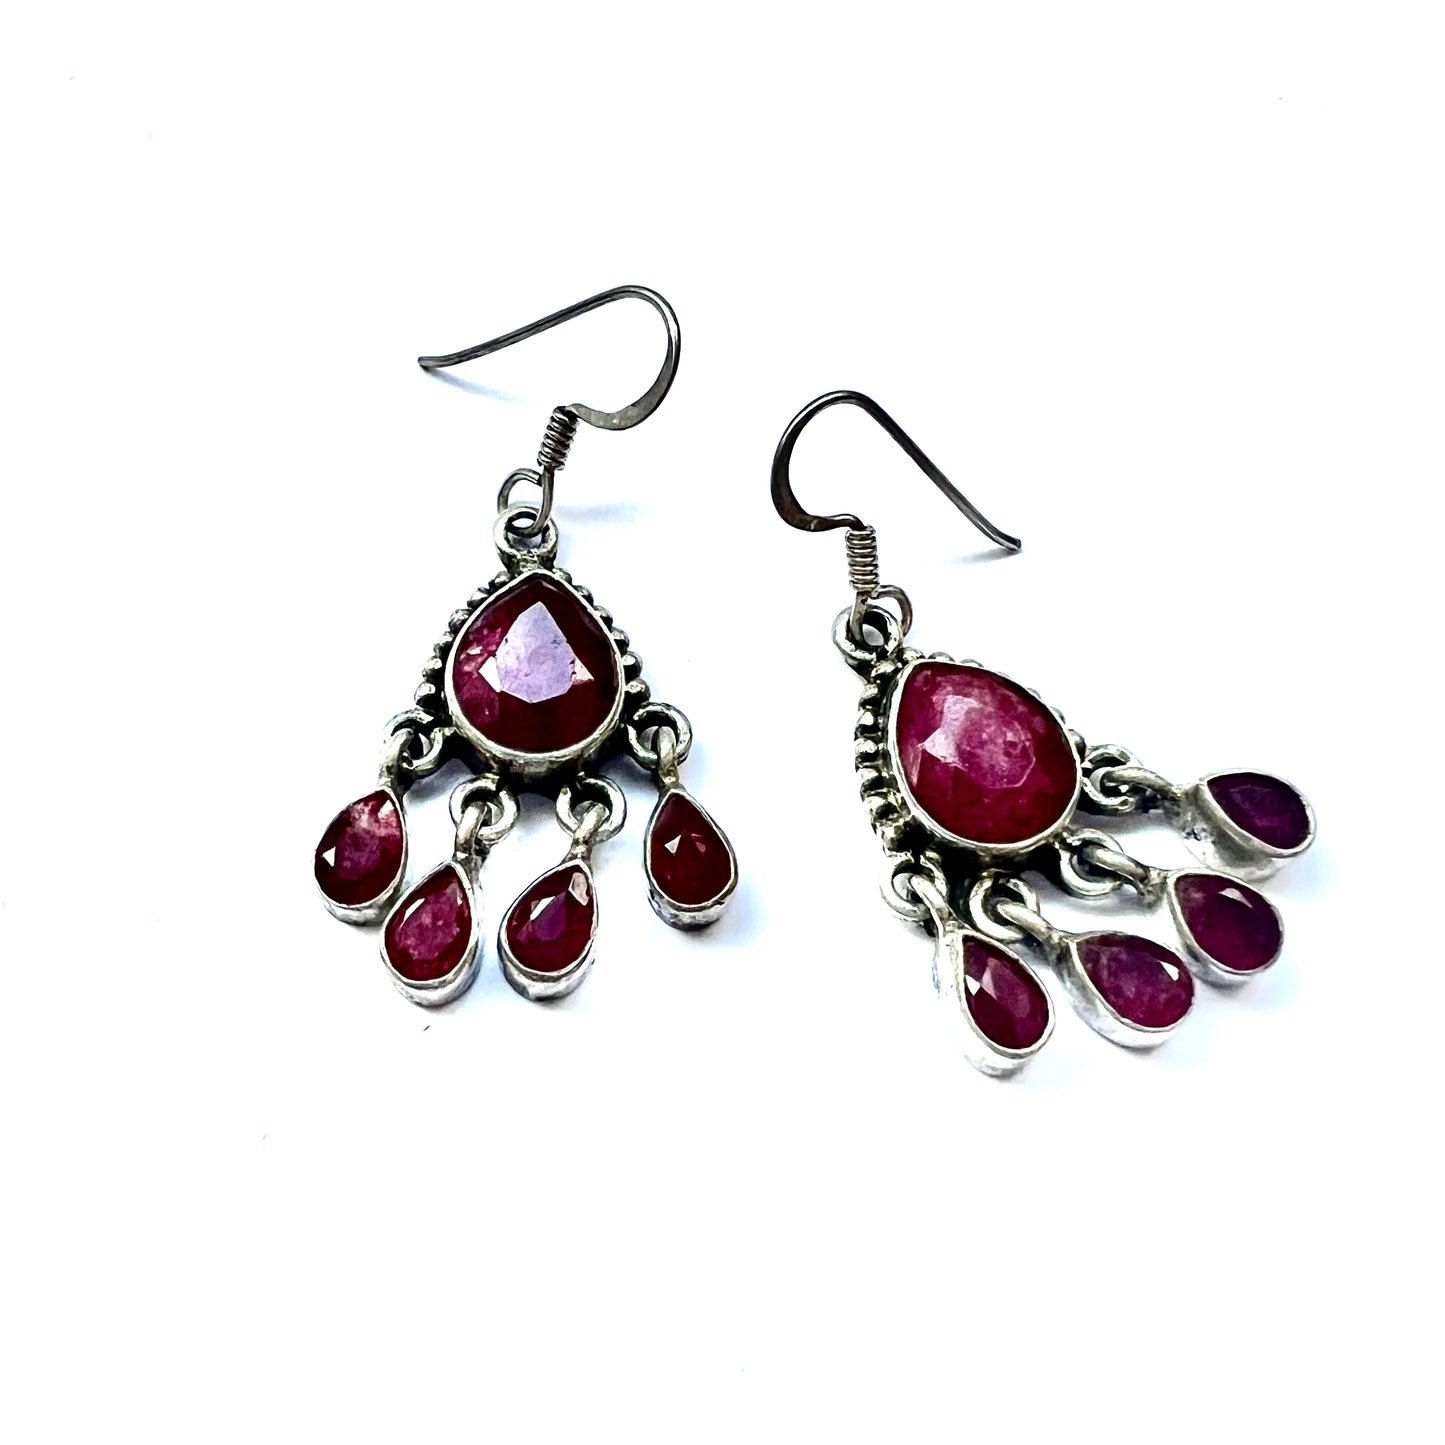 Vintage Indian silver and natural ruby earrings circa mid to late 20th century